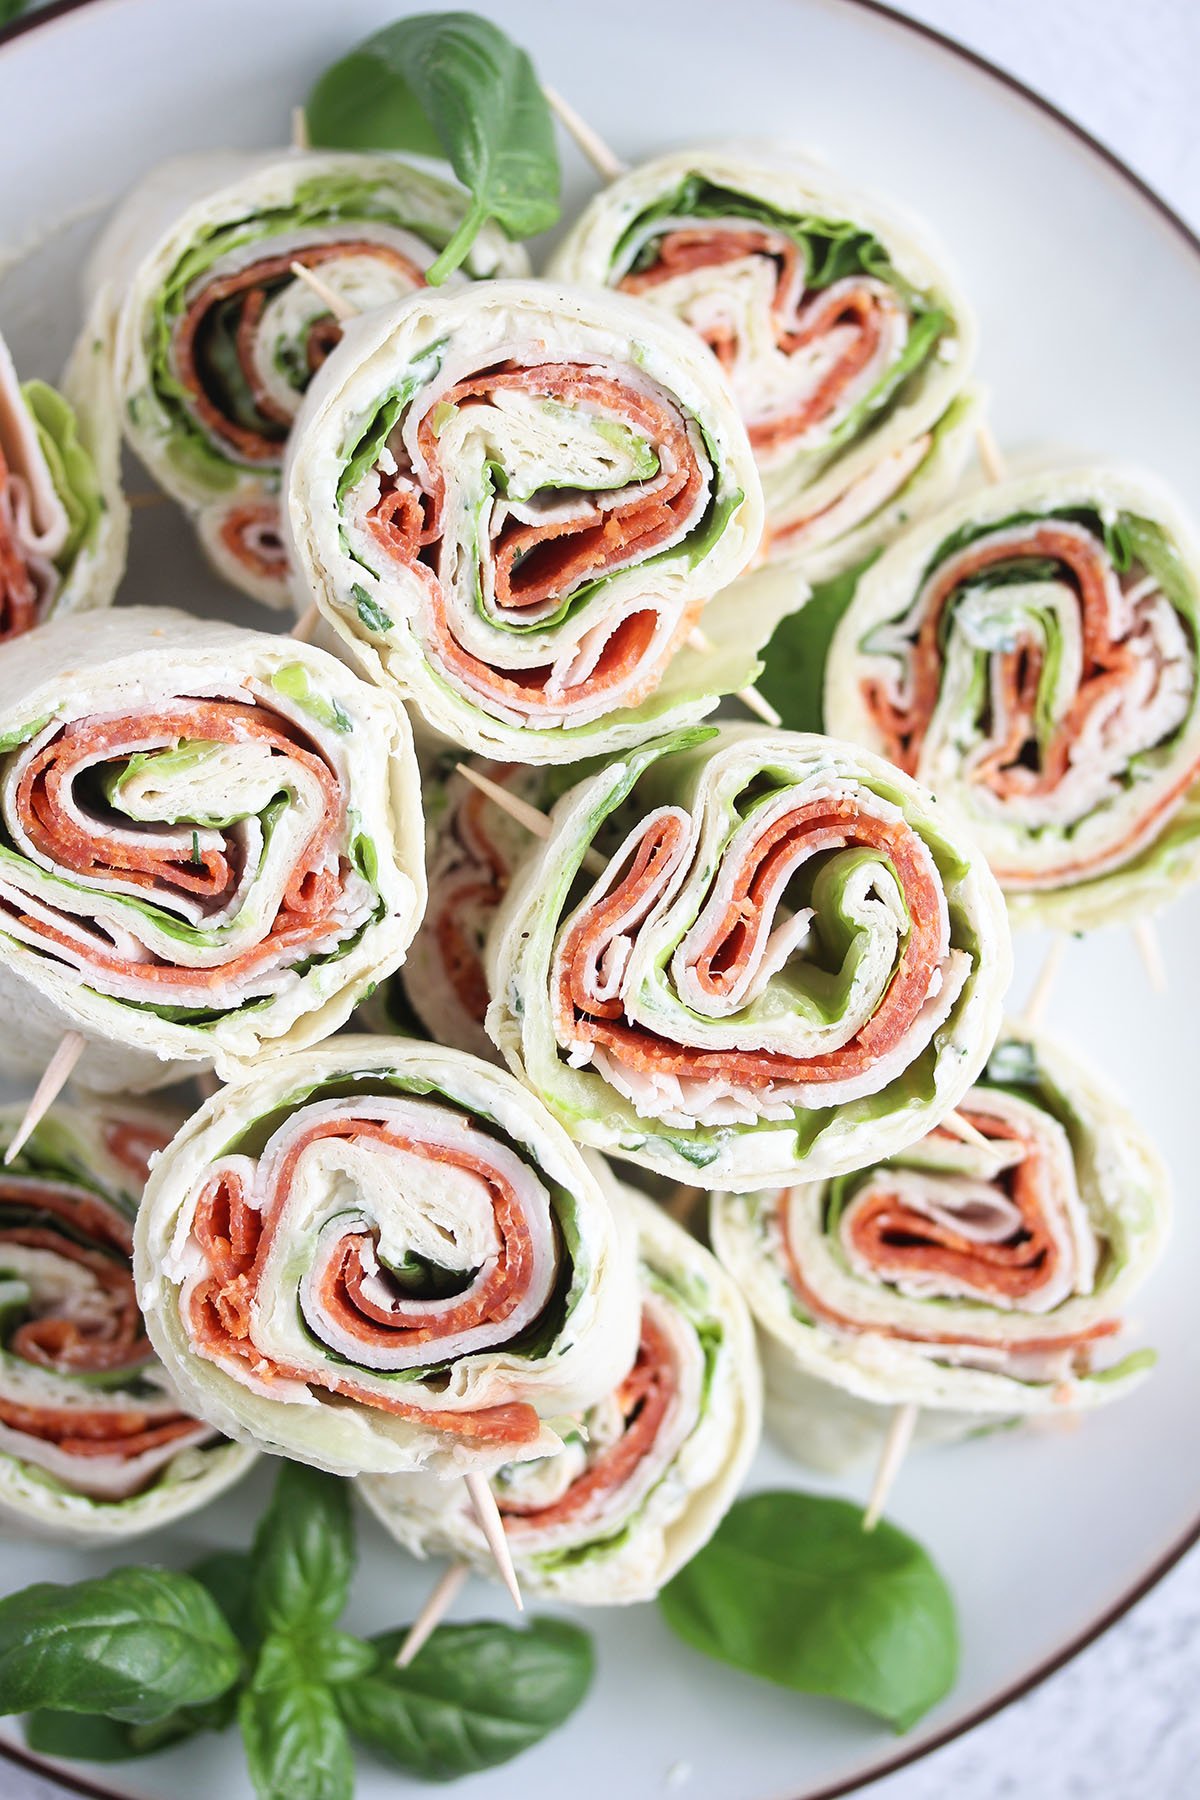 many pinwheel sandwiches stapled on a plate with basil.